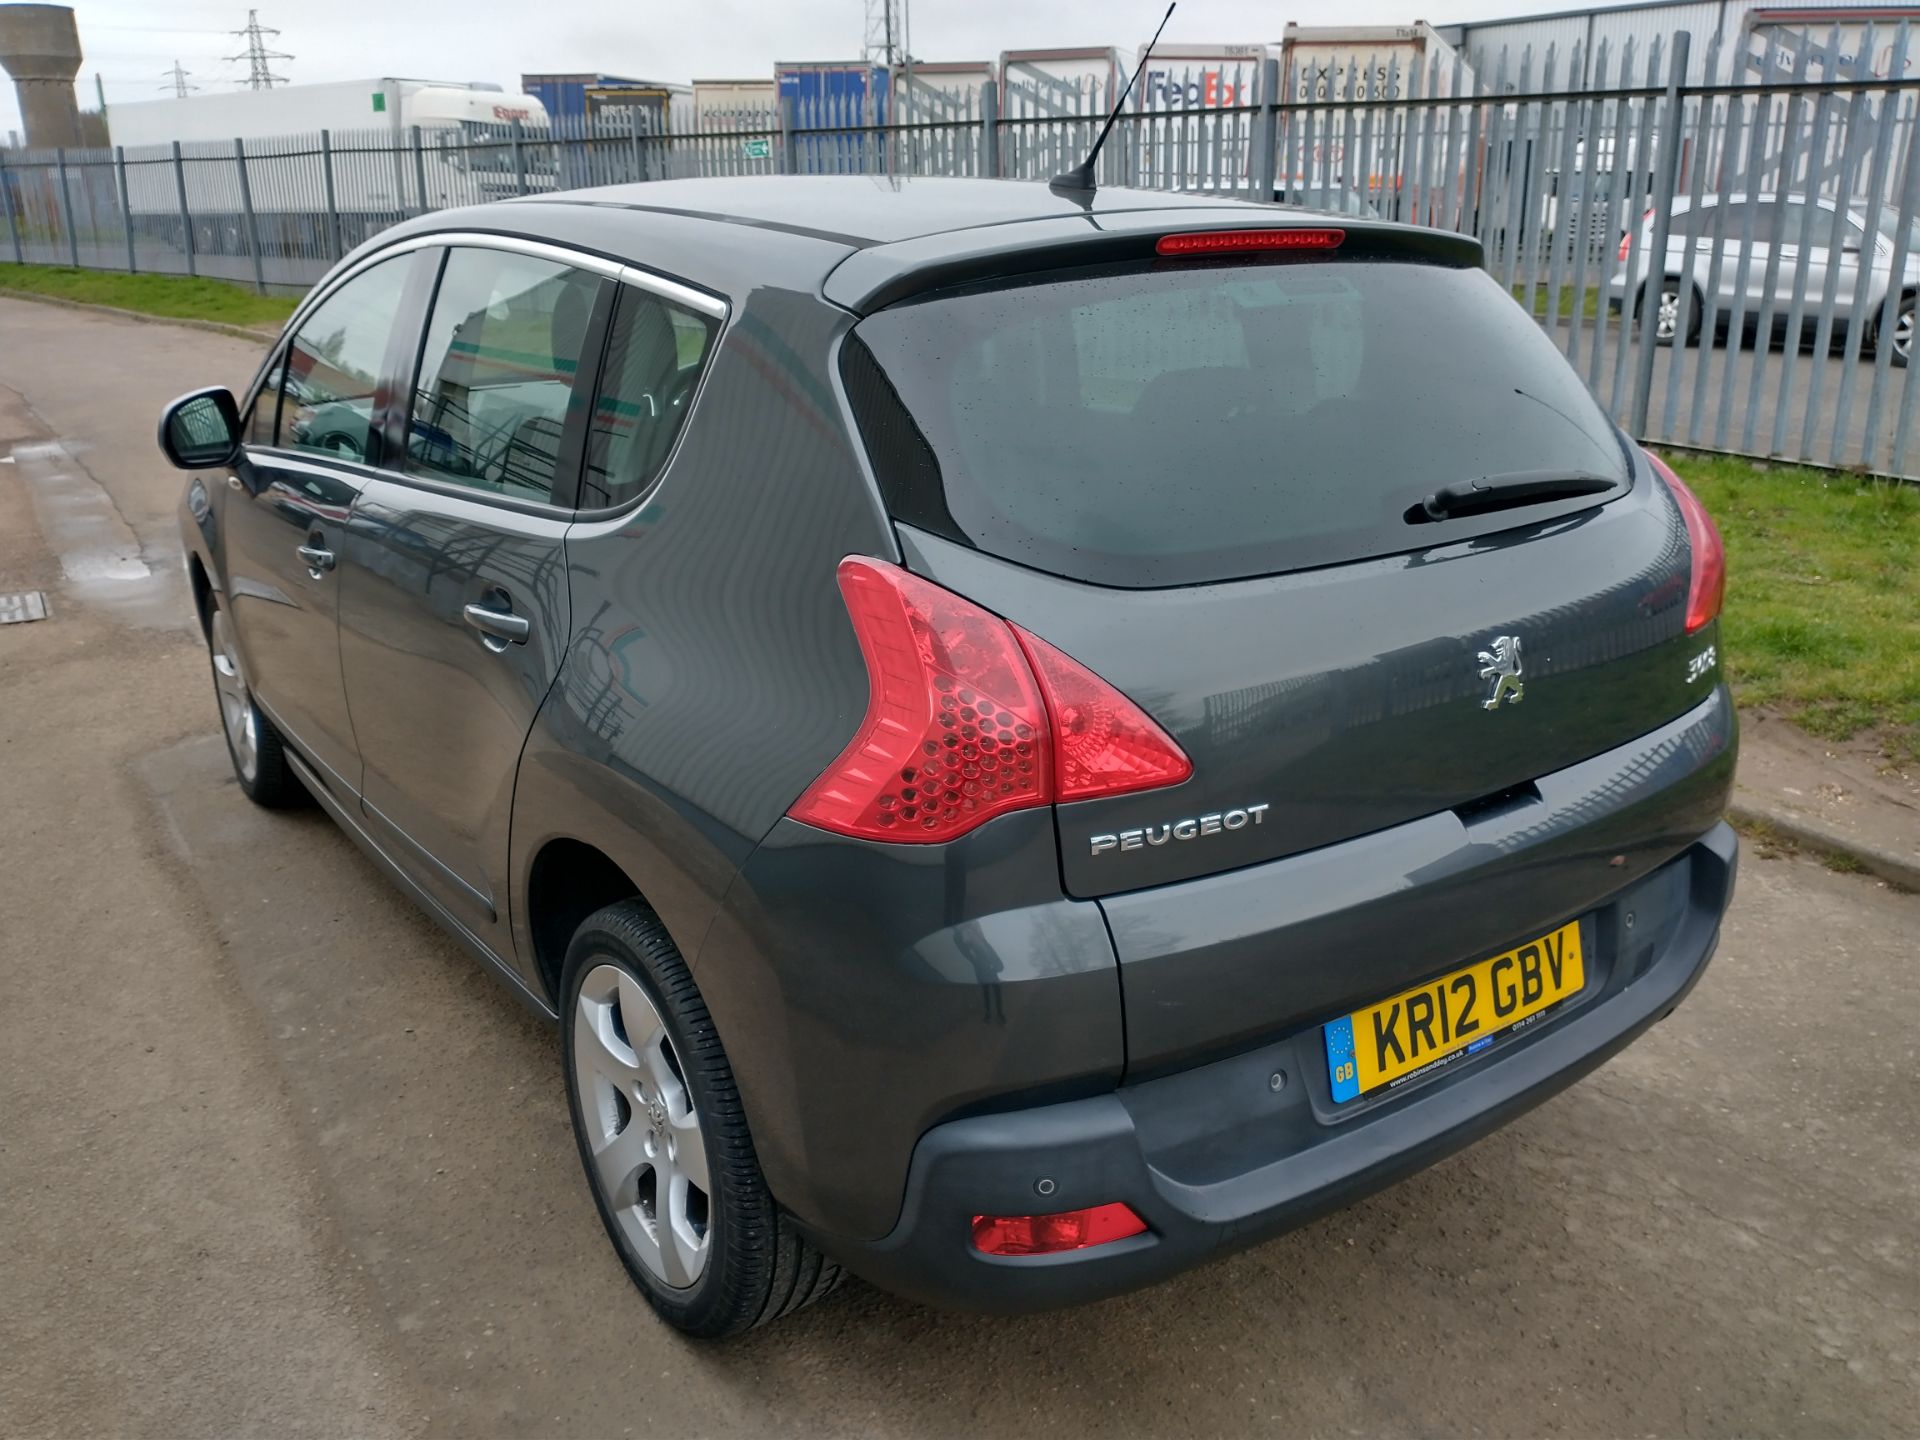 2012 Peugeot 3008 Active HDI 1.6 5DR SUV - CL505 - NO VAT ON THE HAMM - Image 18 of 19